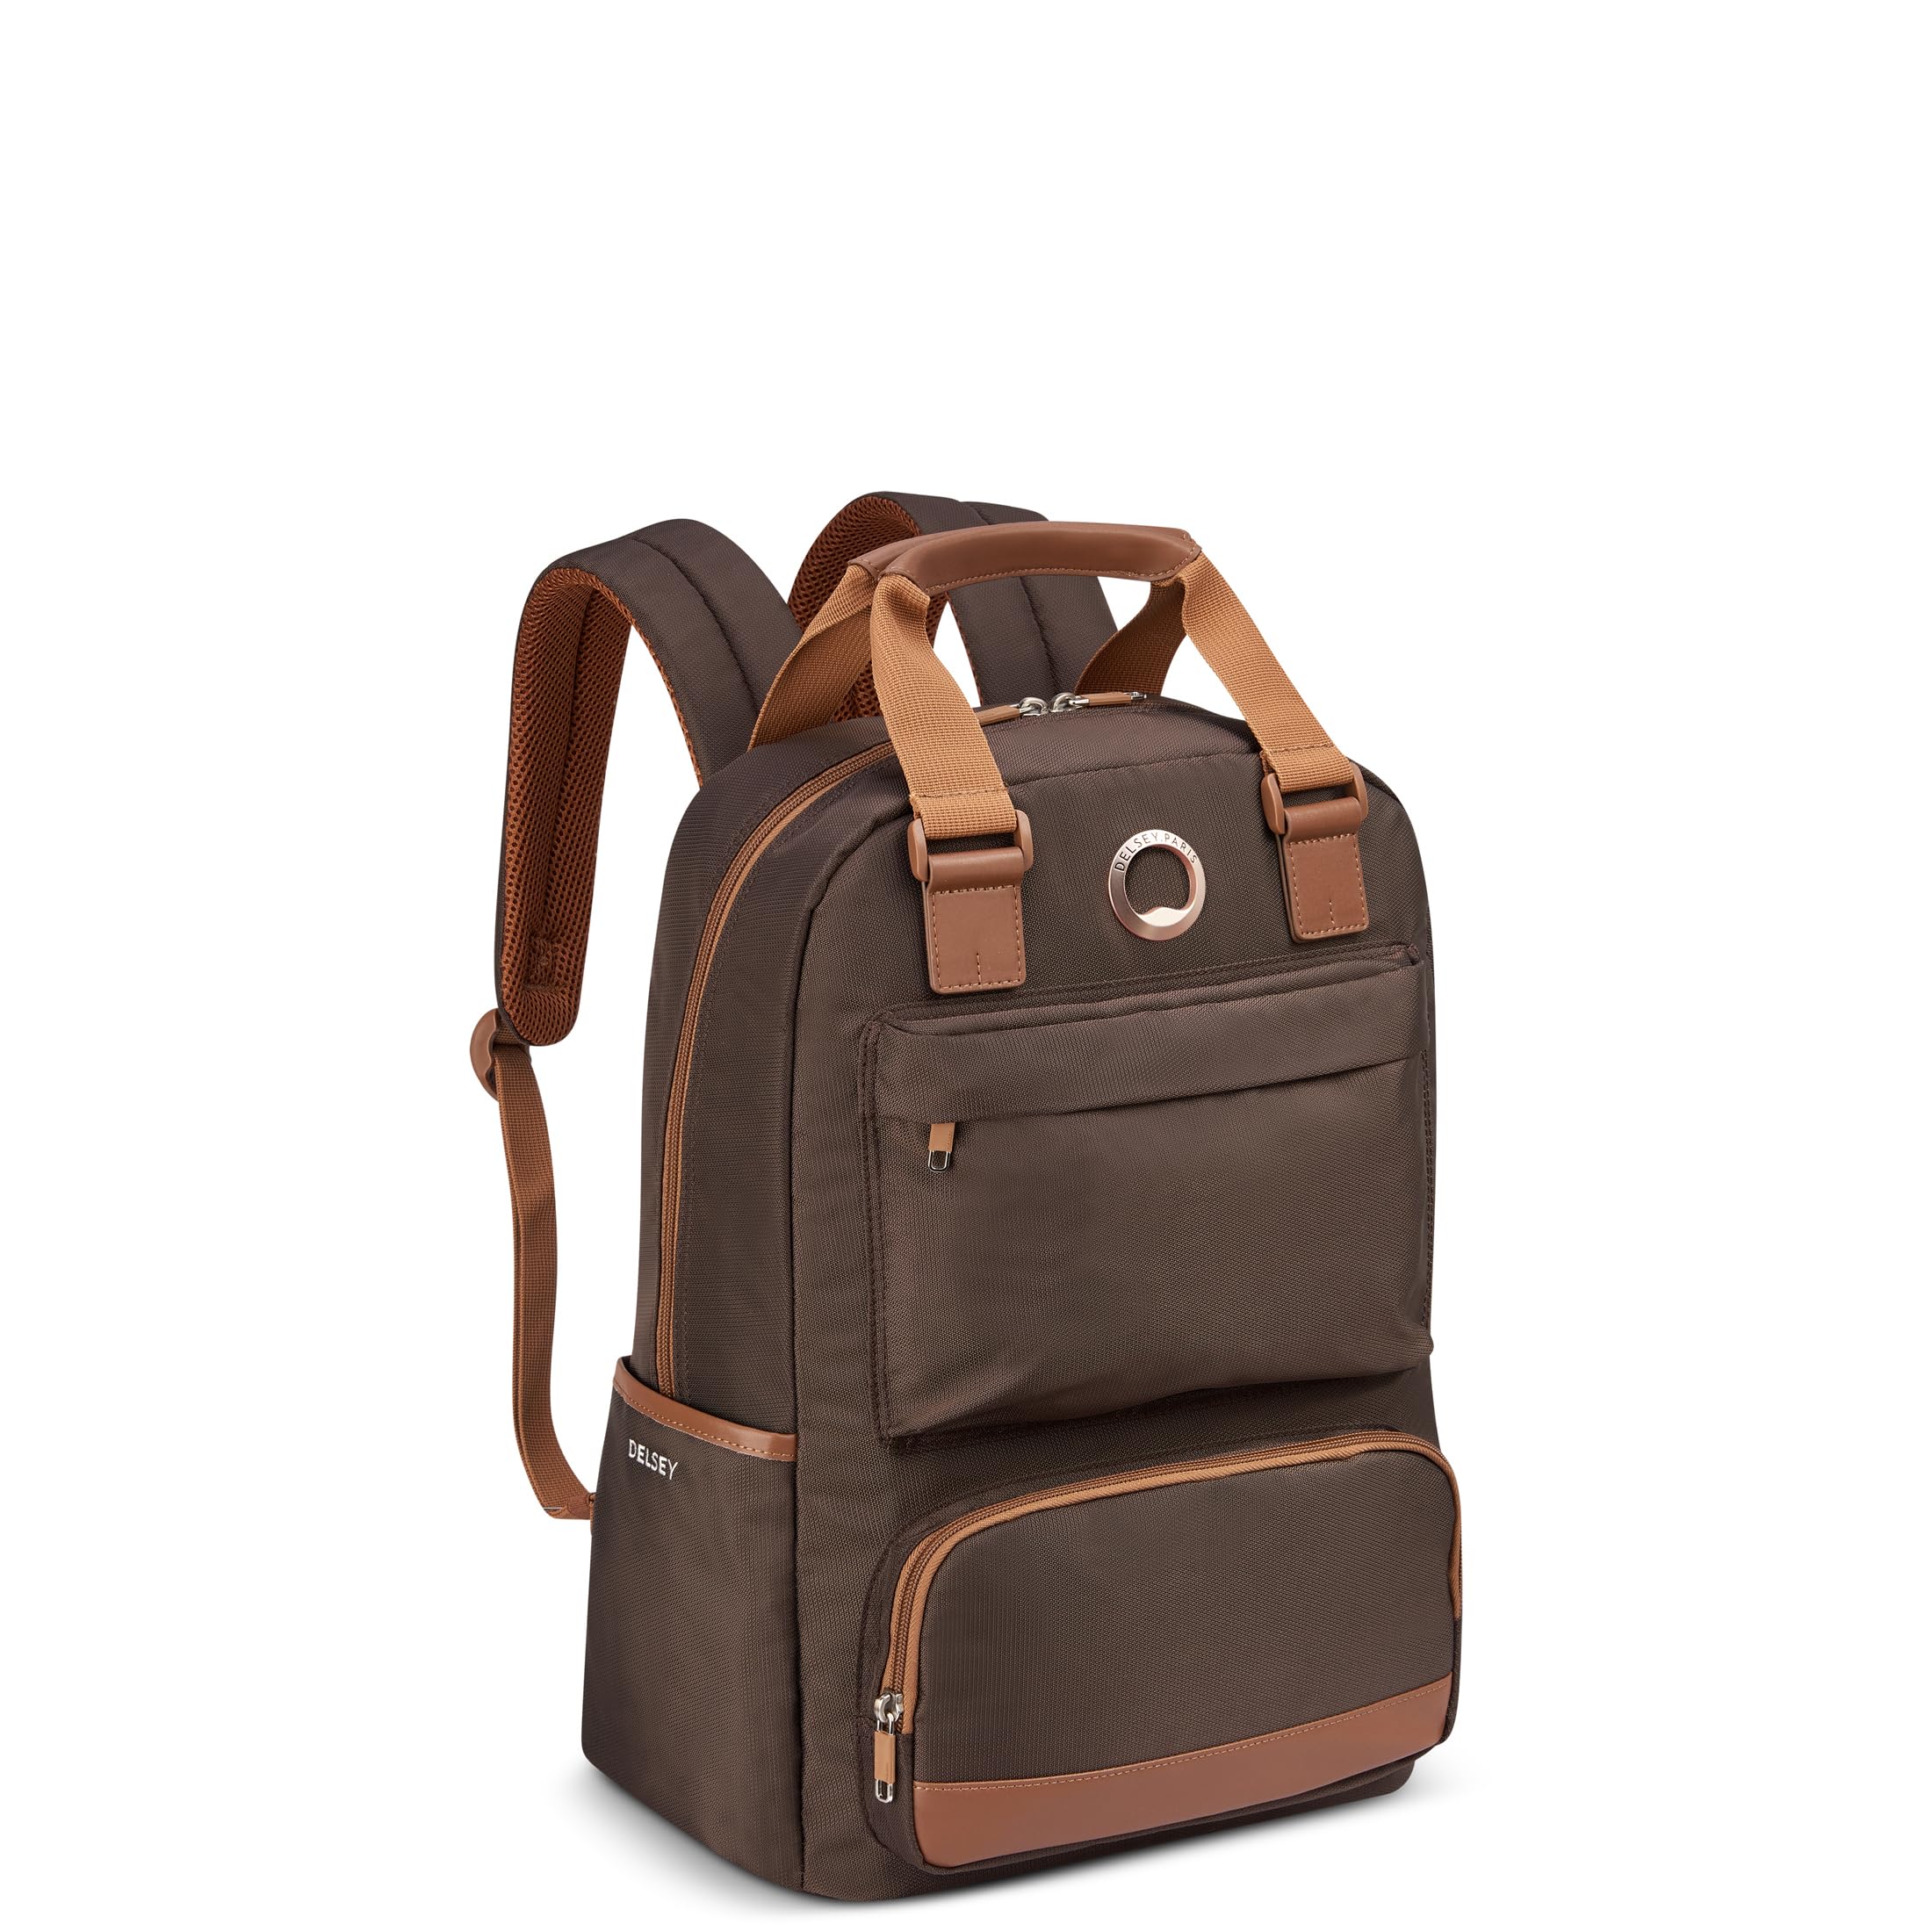 DELSEY Paris Legere Laptop Travel Backpack, Chocolate Brown, 16.5 Inch